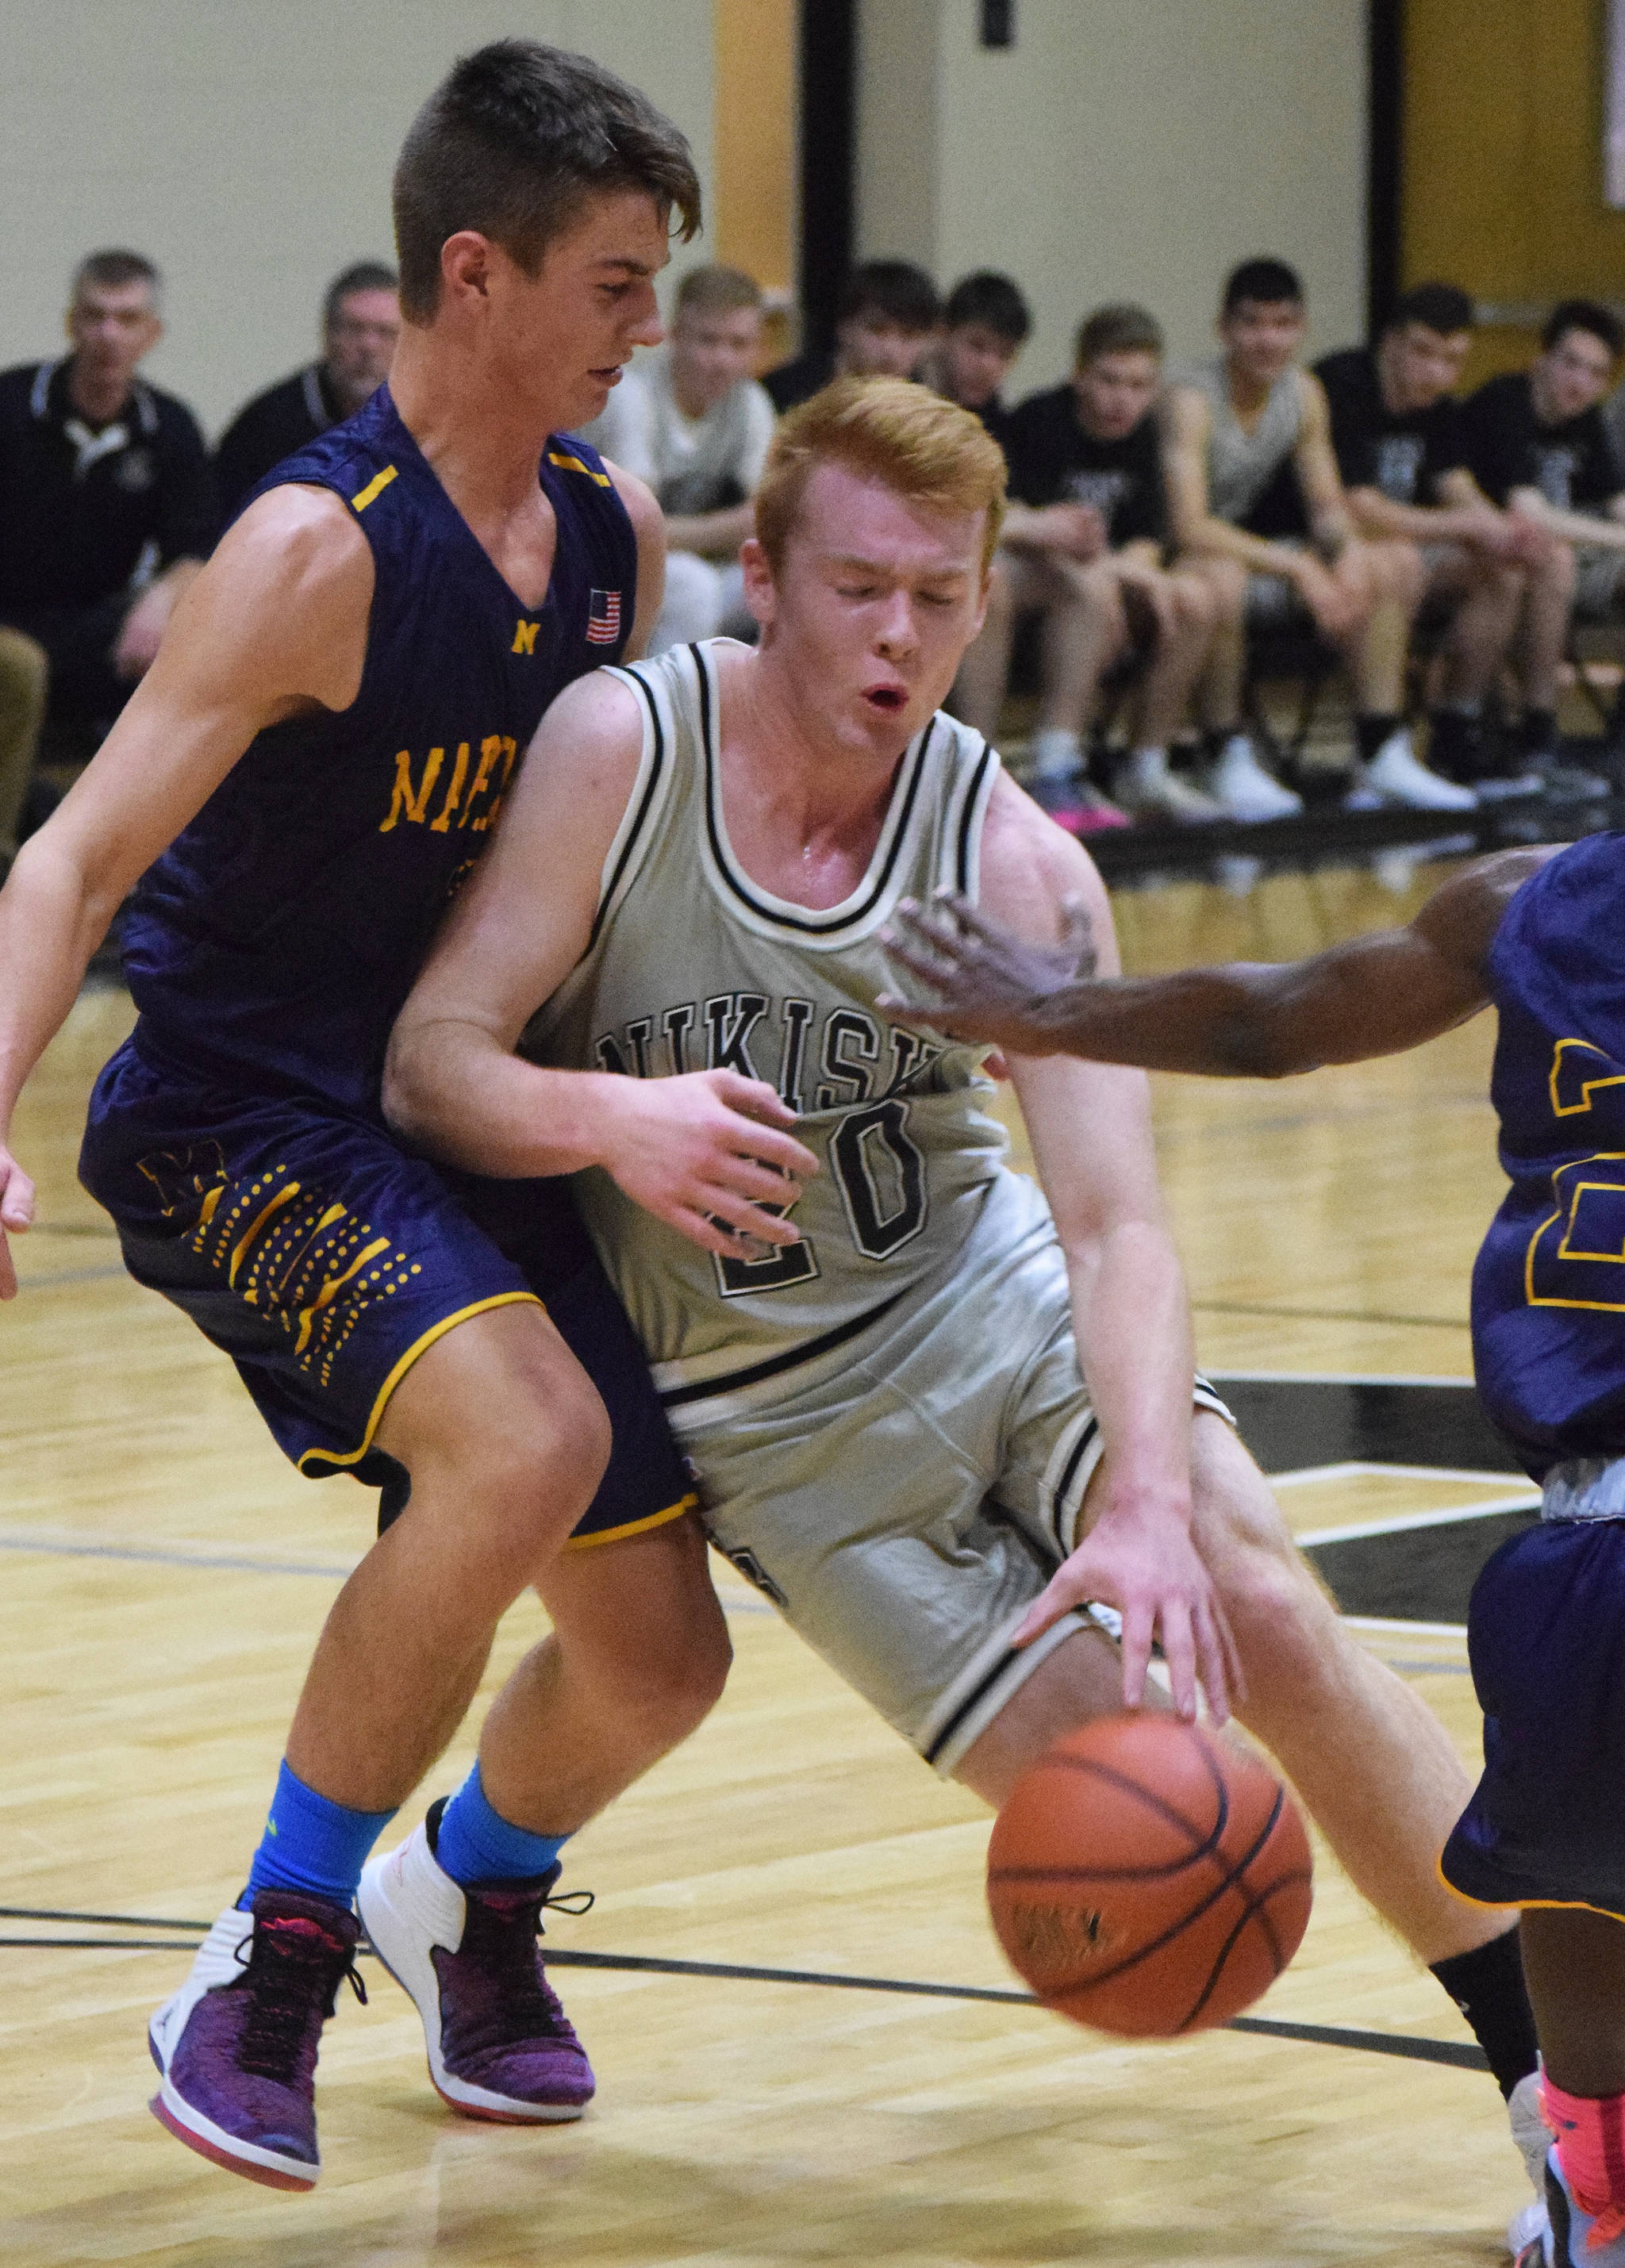 Nikiski’s Jace Kornstad (right) drives by Homer’s Clayton Beachy Friday night in a Southcentral Conference clash at Nikiski High School. (Photo by Joey Klecka/Peninsula Clarion)